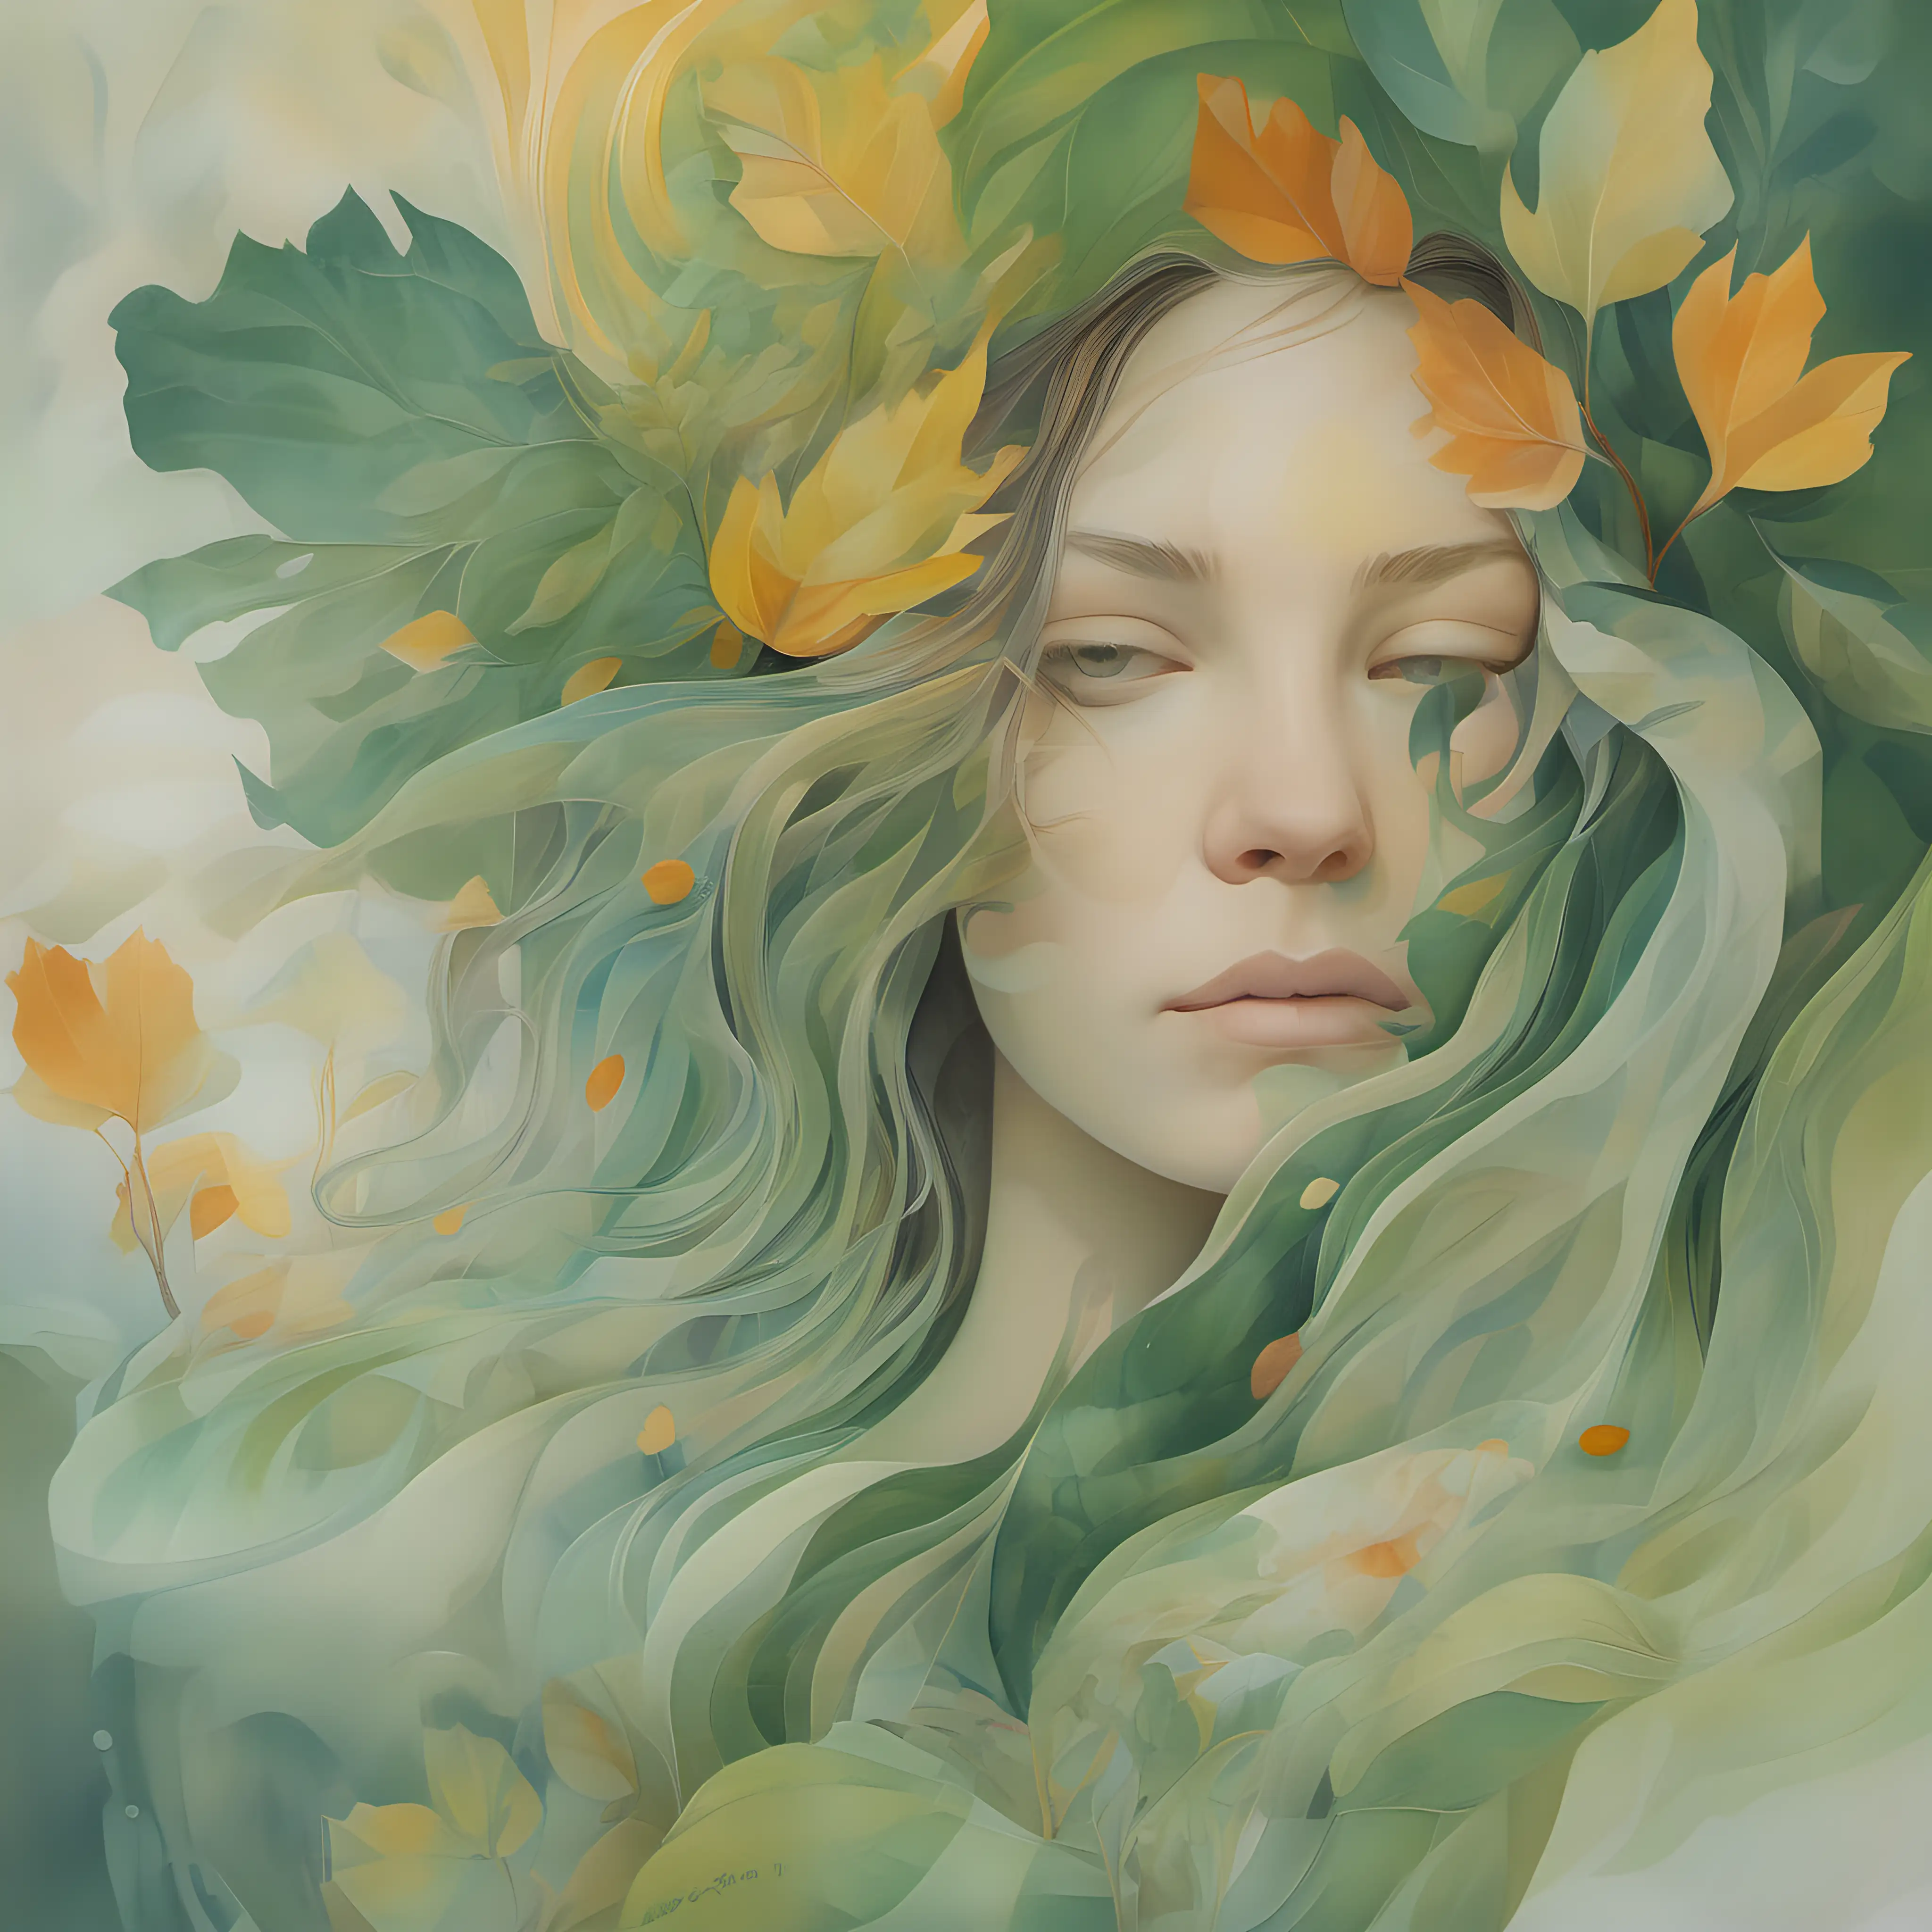 artistic rendering of a woman with elements that suggest she may be personifying an aspect of nature or perhaps a mythical being. She has a serene expression, her hair and the fabric around her blending into what seems to be a painterly representation of foliage or petals, in soft hues of green, yellow, and orange. The background hints at a tranquil seascape at twilight. This composition combines a portrait with abstract natural elements, creating a dreamlike and ethereal atmosphere.